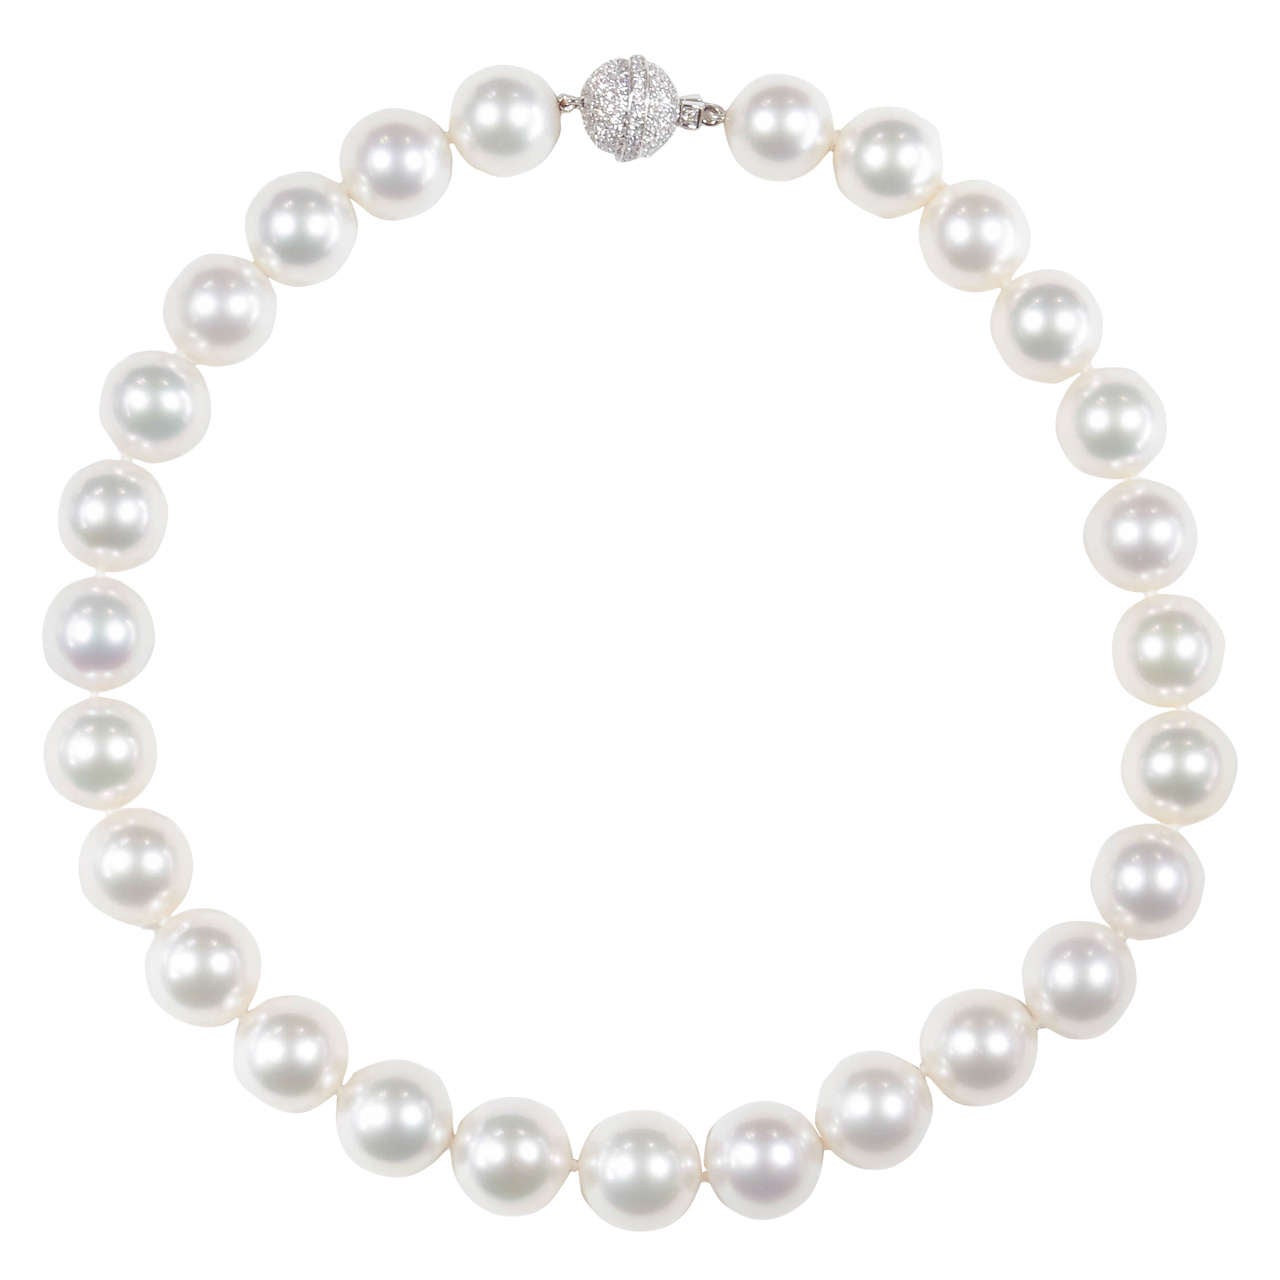 Important South Sea Pearl Necklace with Diamond Clasp